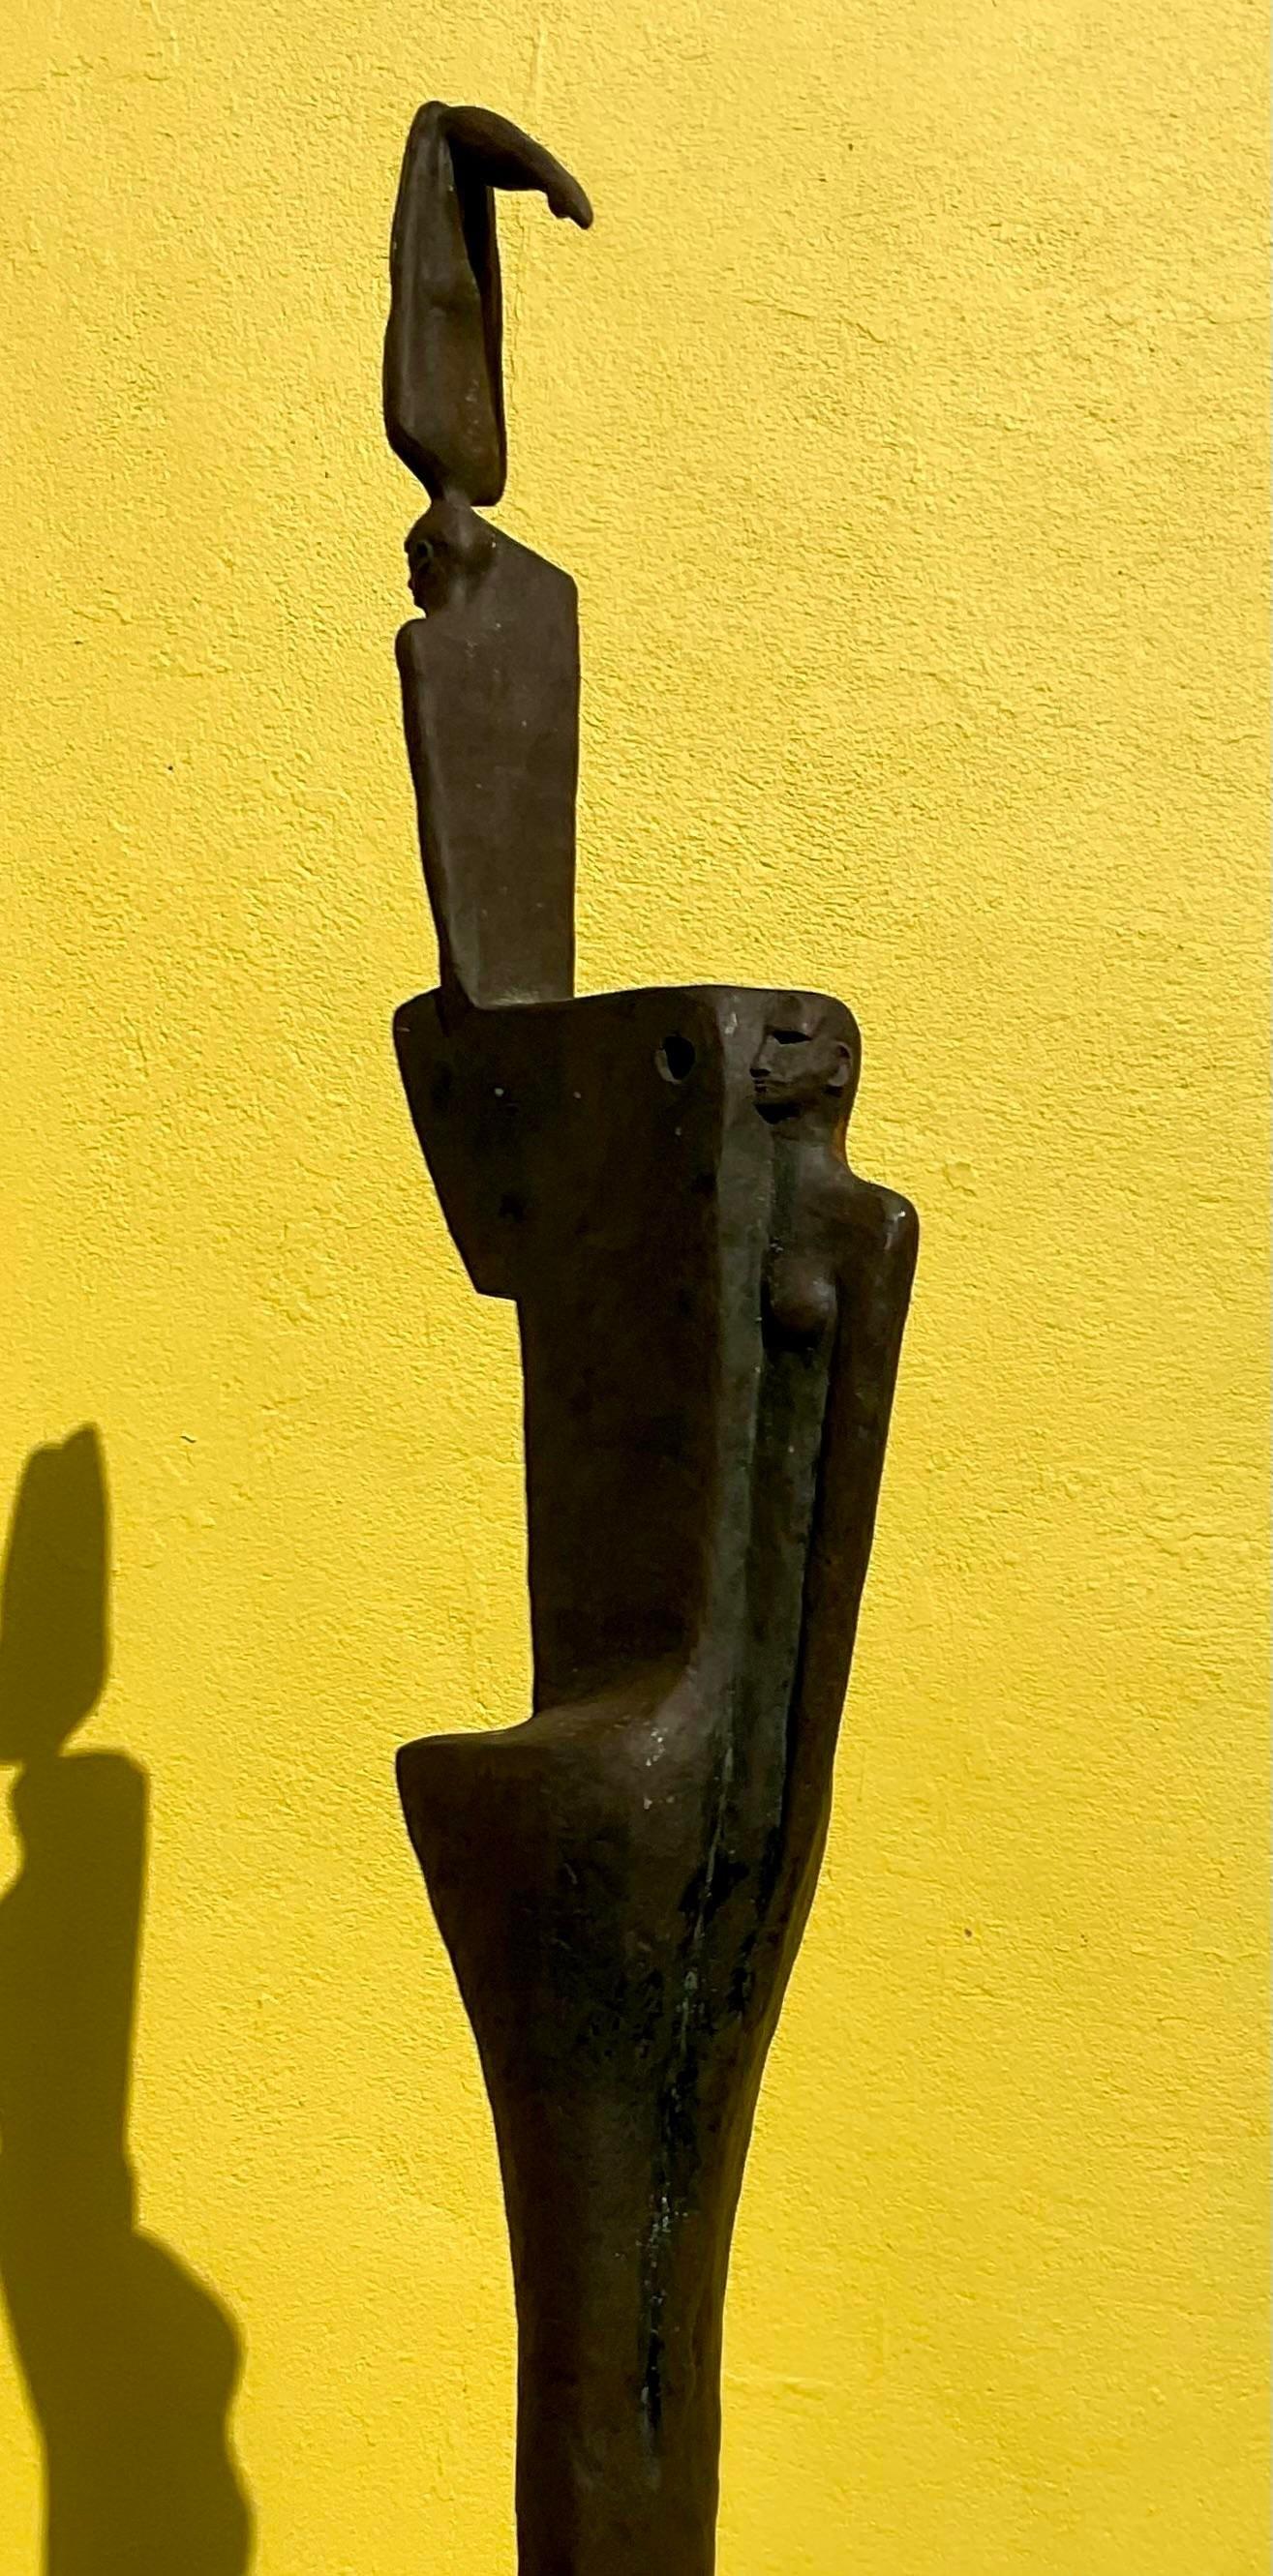 A fantastic vintage Boho sculpture. A chic Abstract Surrealist work in a beautiful patinated bronze. Done by the American artist Thom Cooney Crawford. Acquired from a Palm Beach estate. 